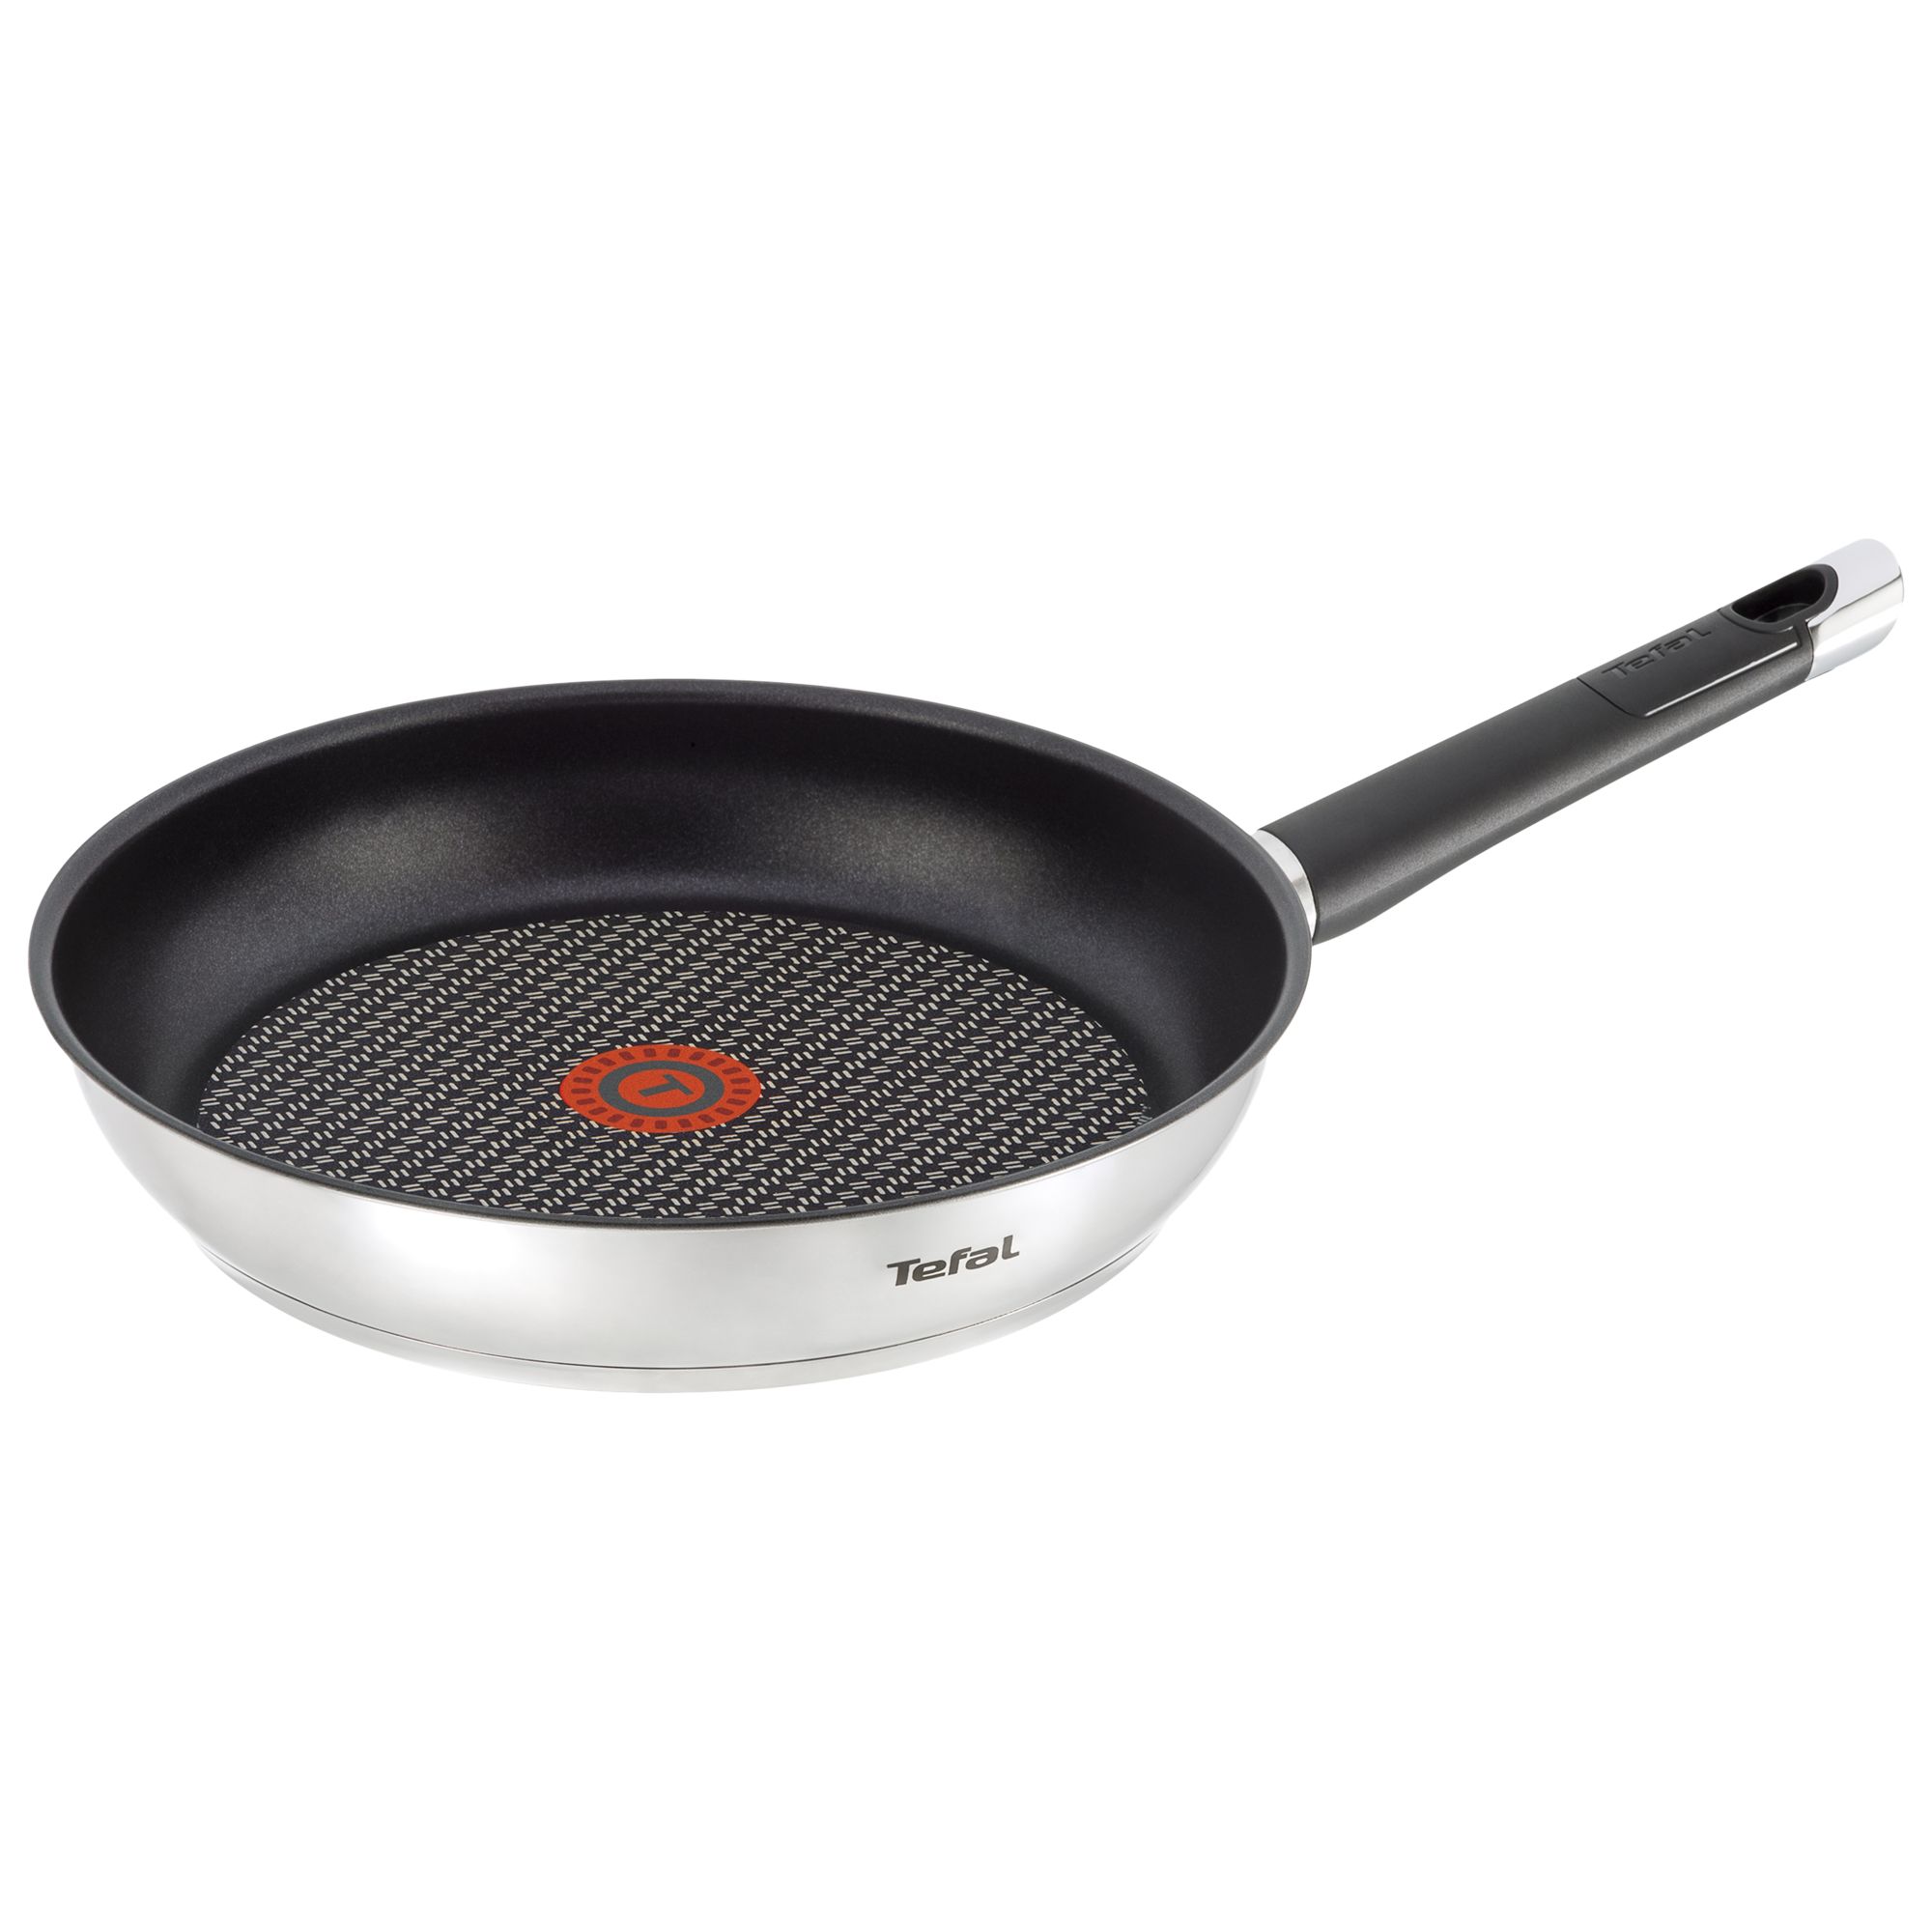 Tefal Emotion Stainless Steel Non-Stick Frying Pan